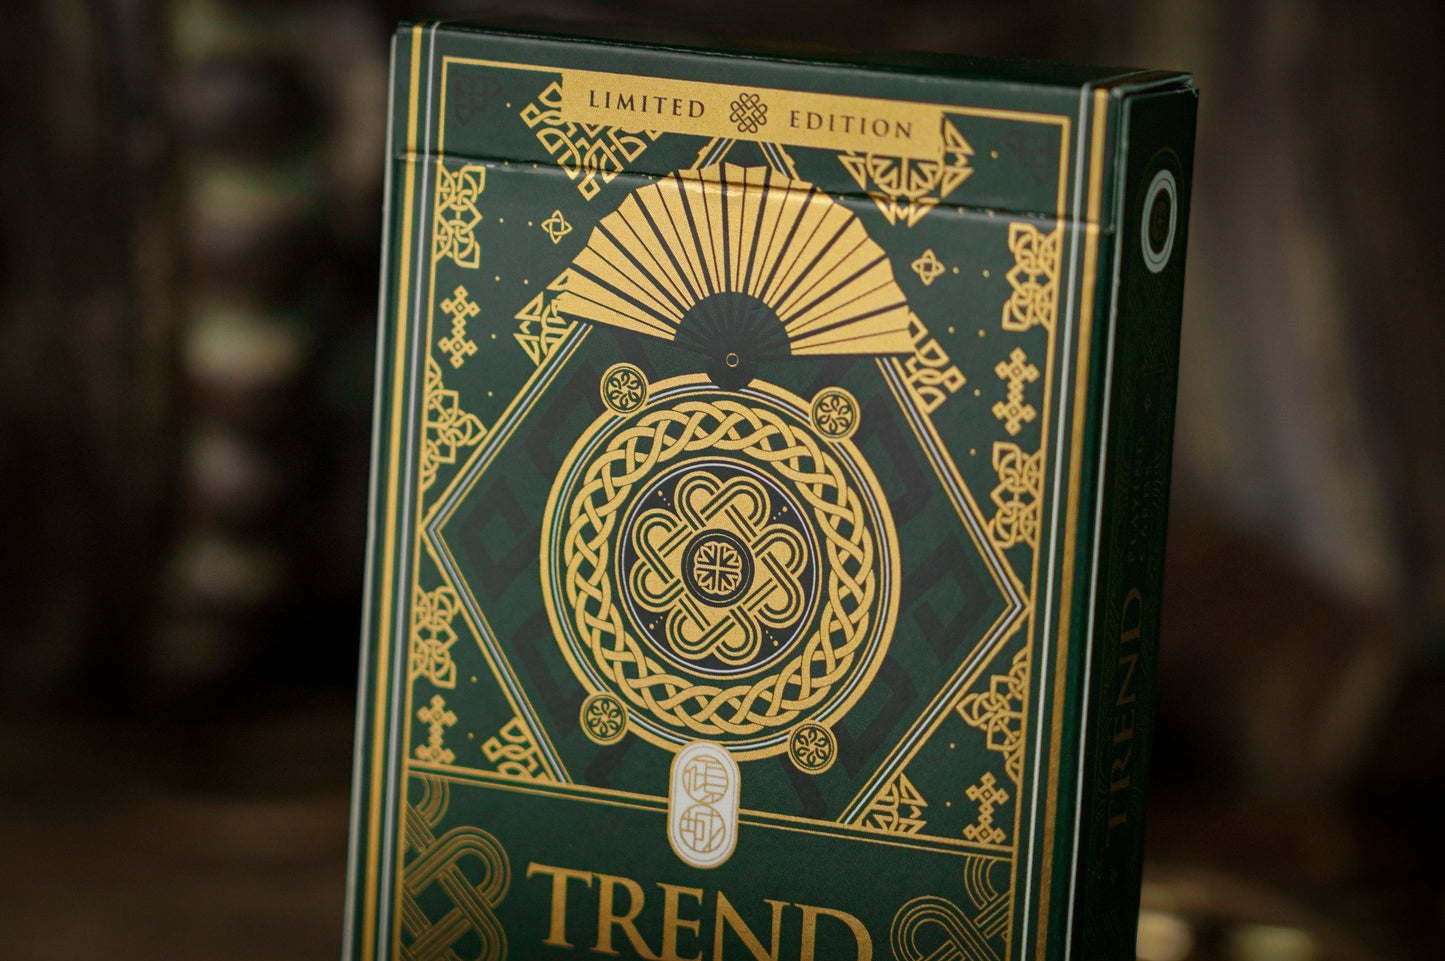 Trend Playing Cards by TCC